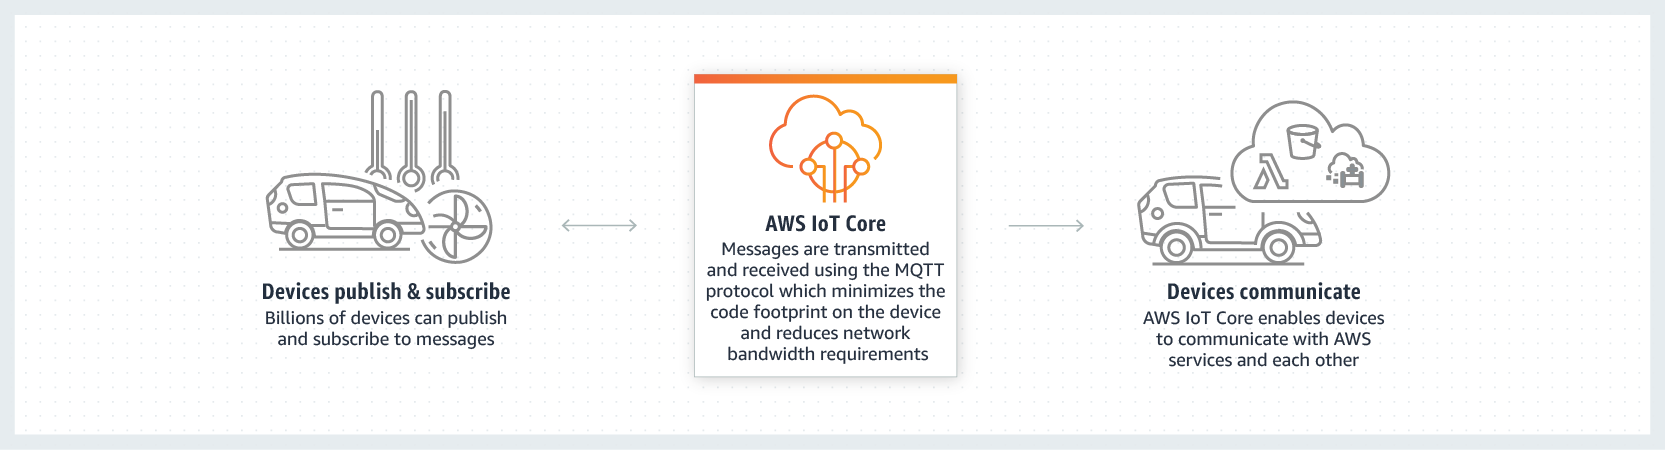 EMnify Connectivity integration into AWS IoT Core